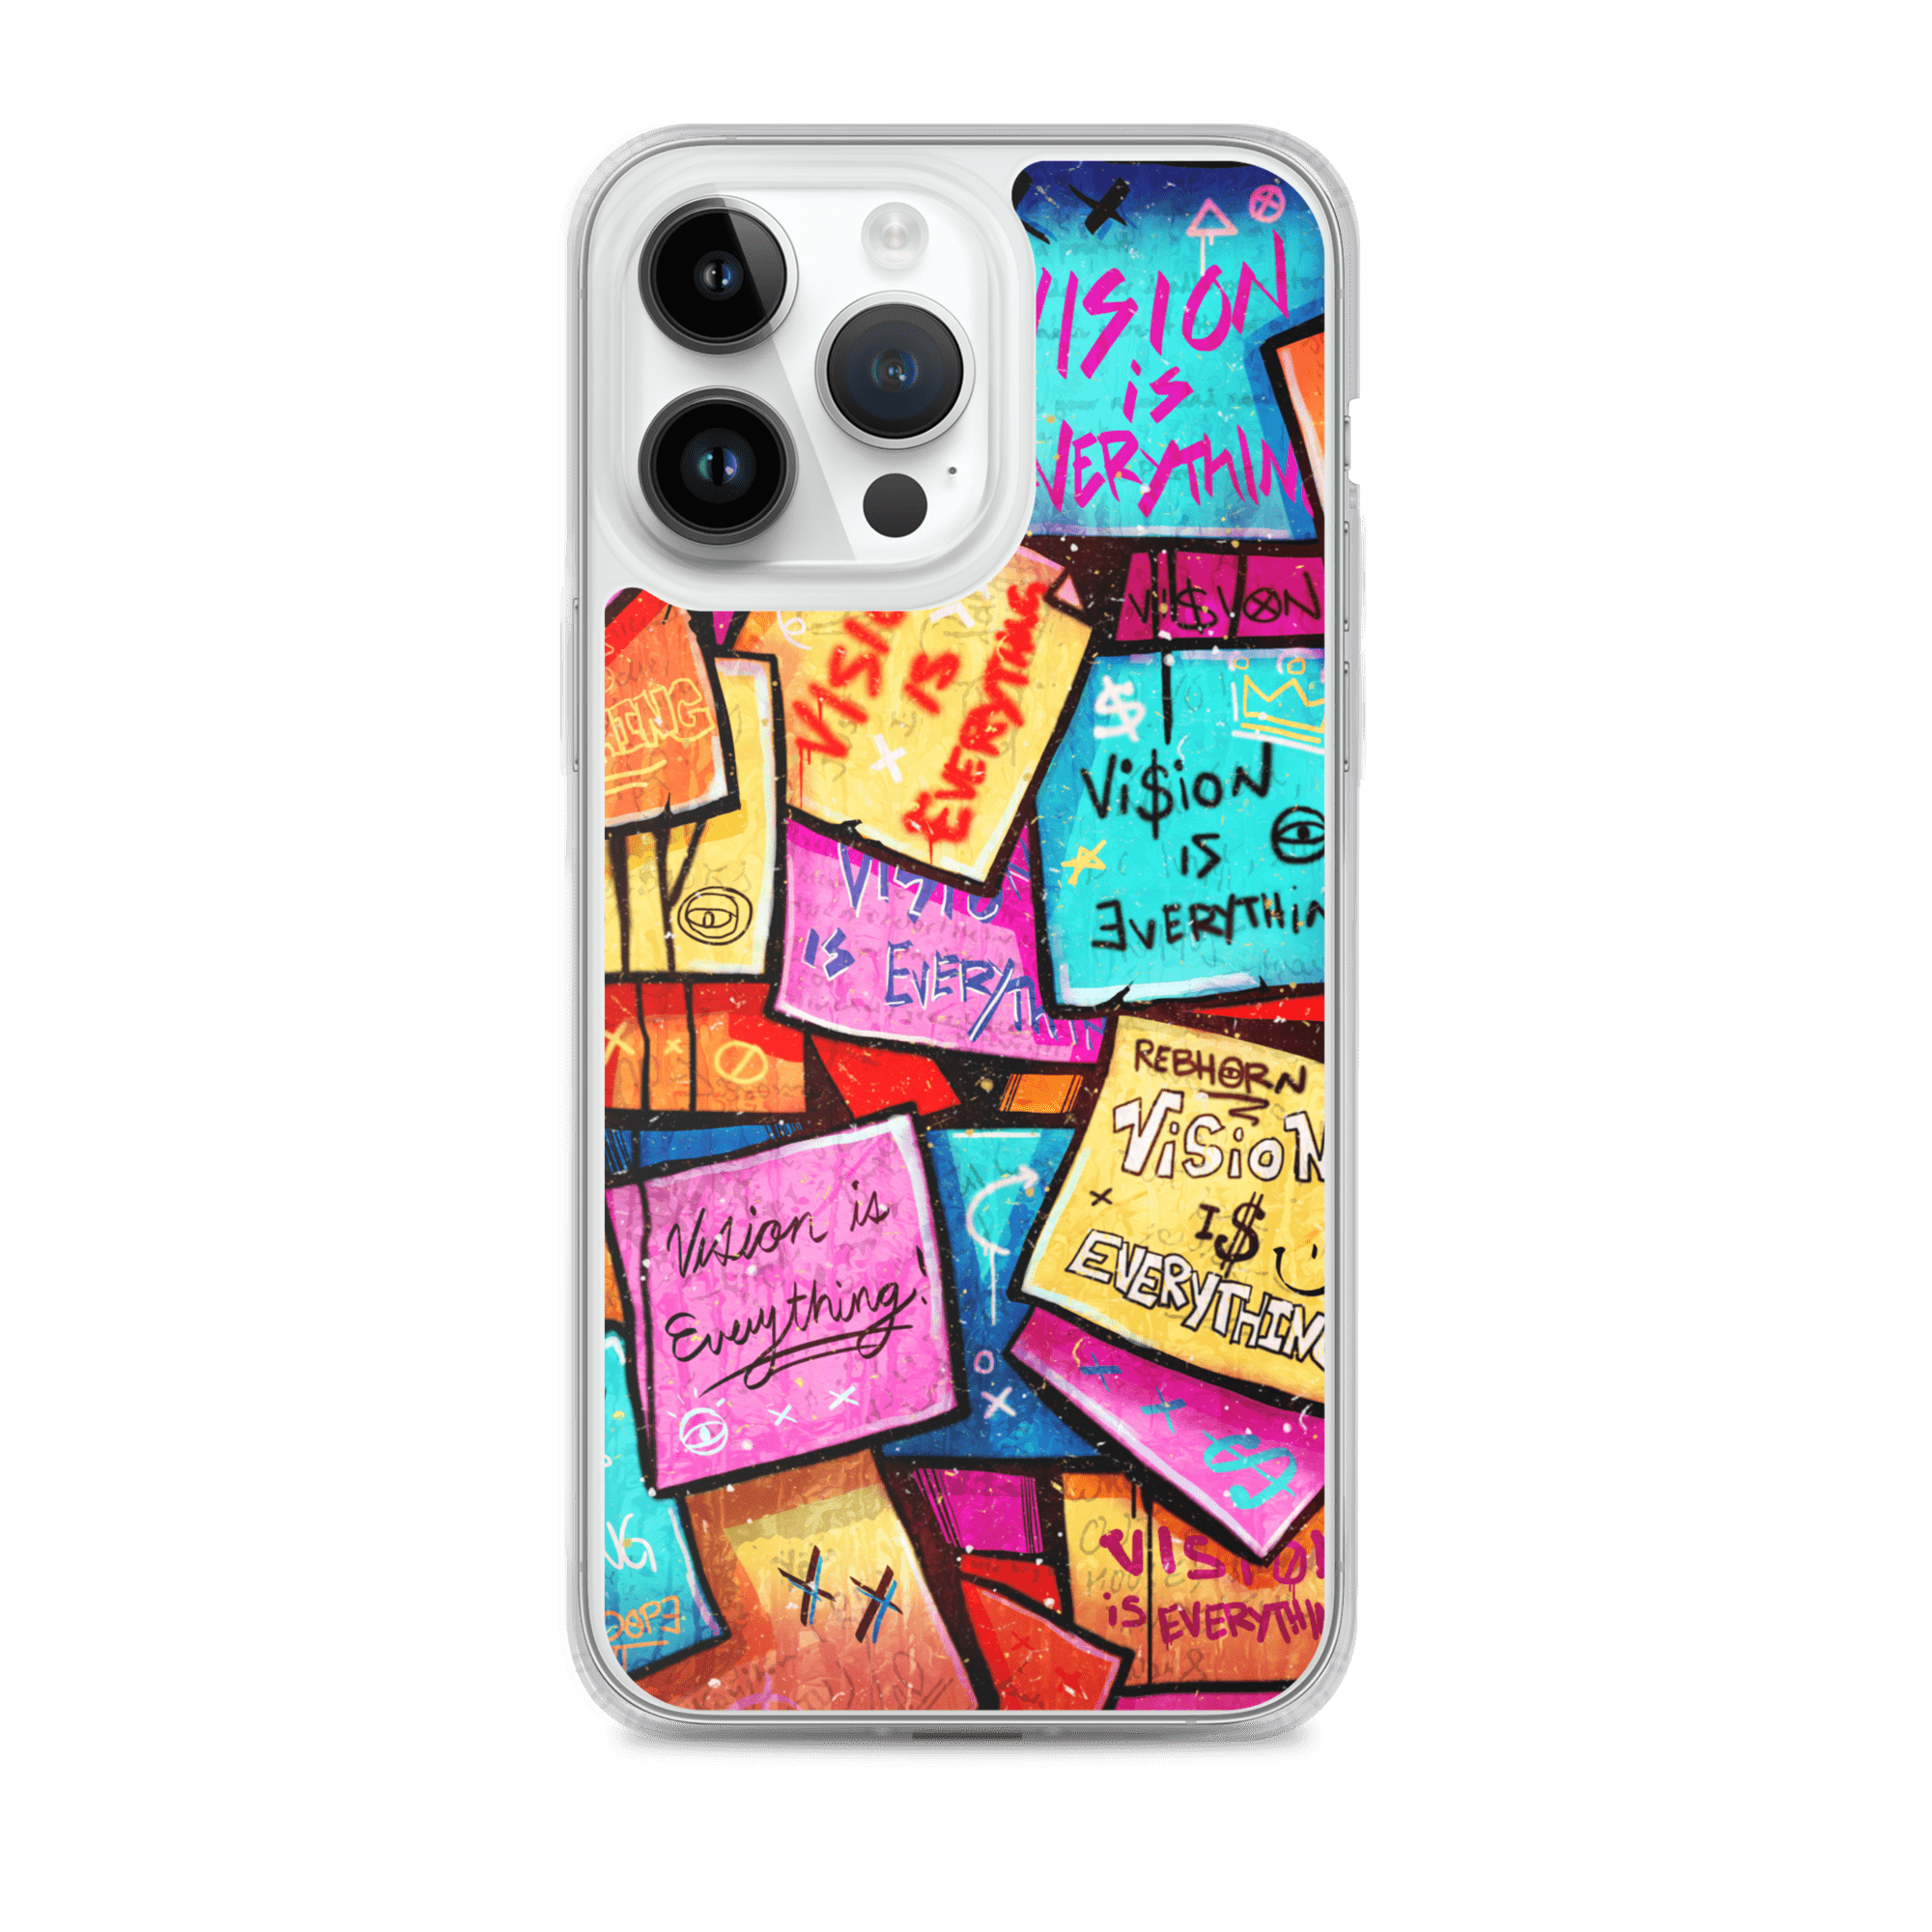 Vision Is Everything iPhone Case - REBHORN DESIGN